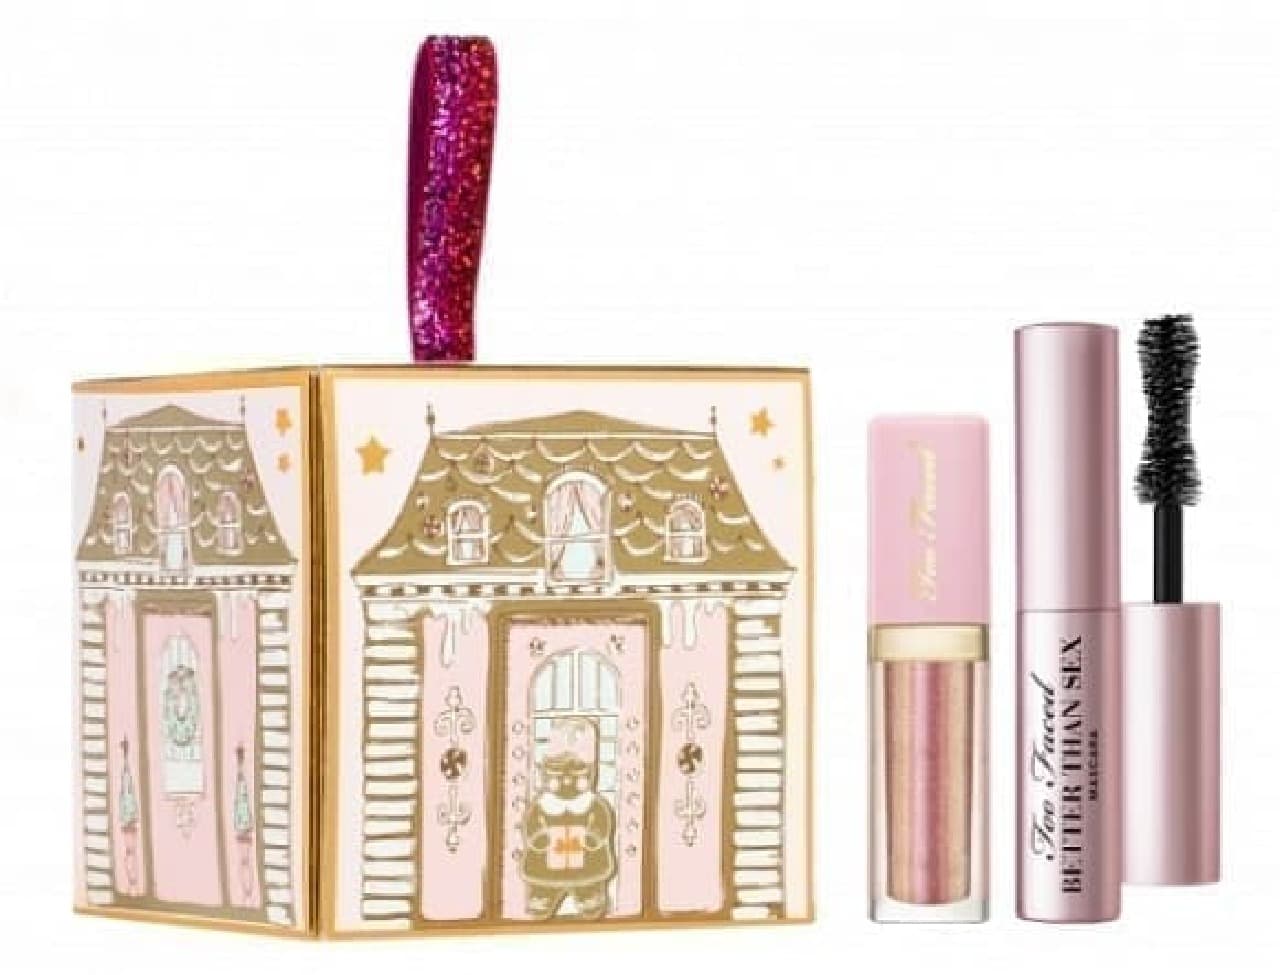 Too Faced's "Pretty Little Present"